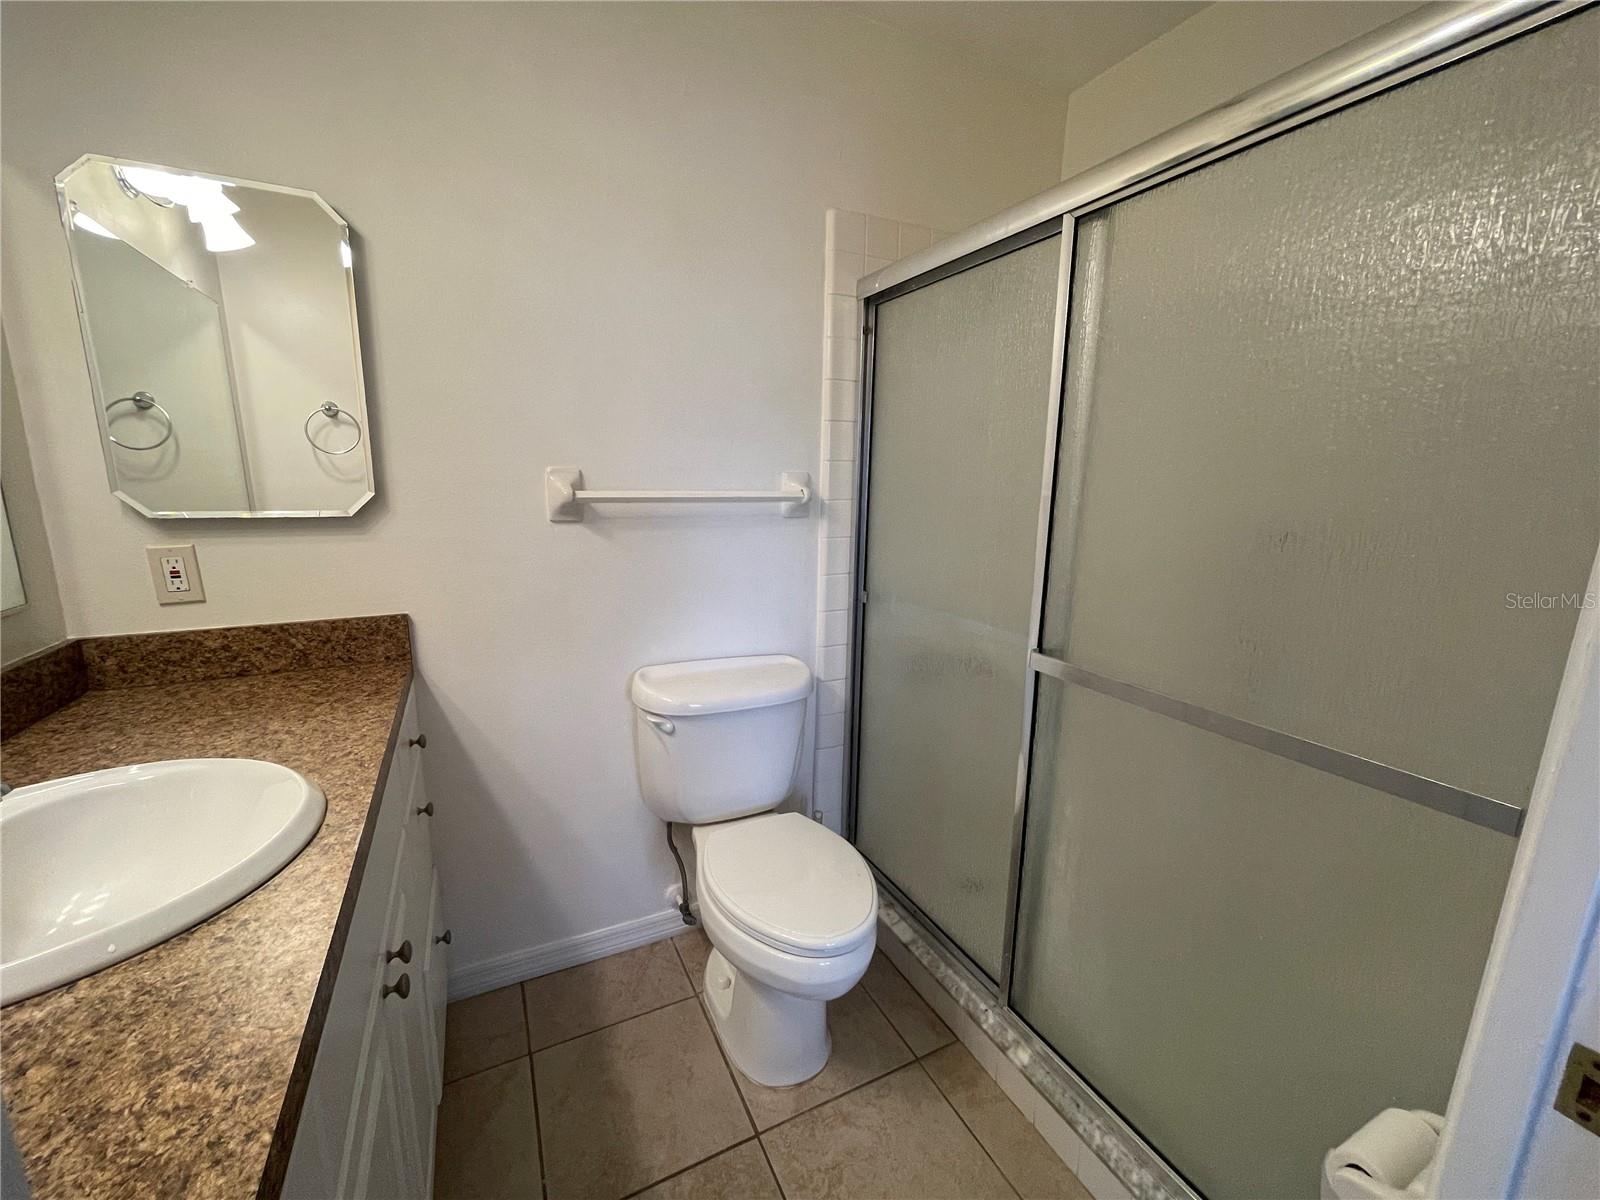 With walk-in shower